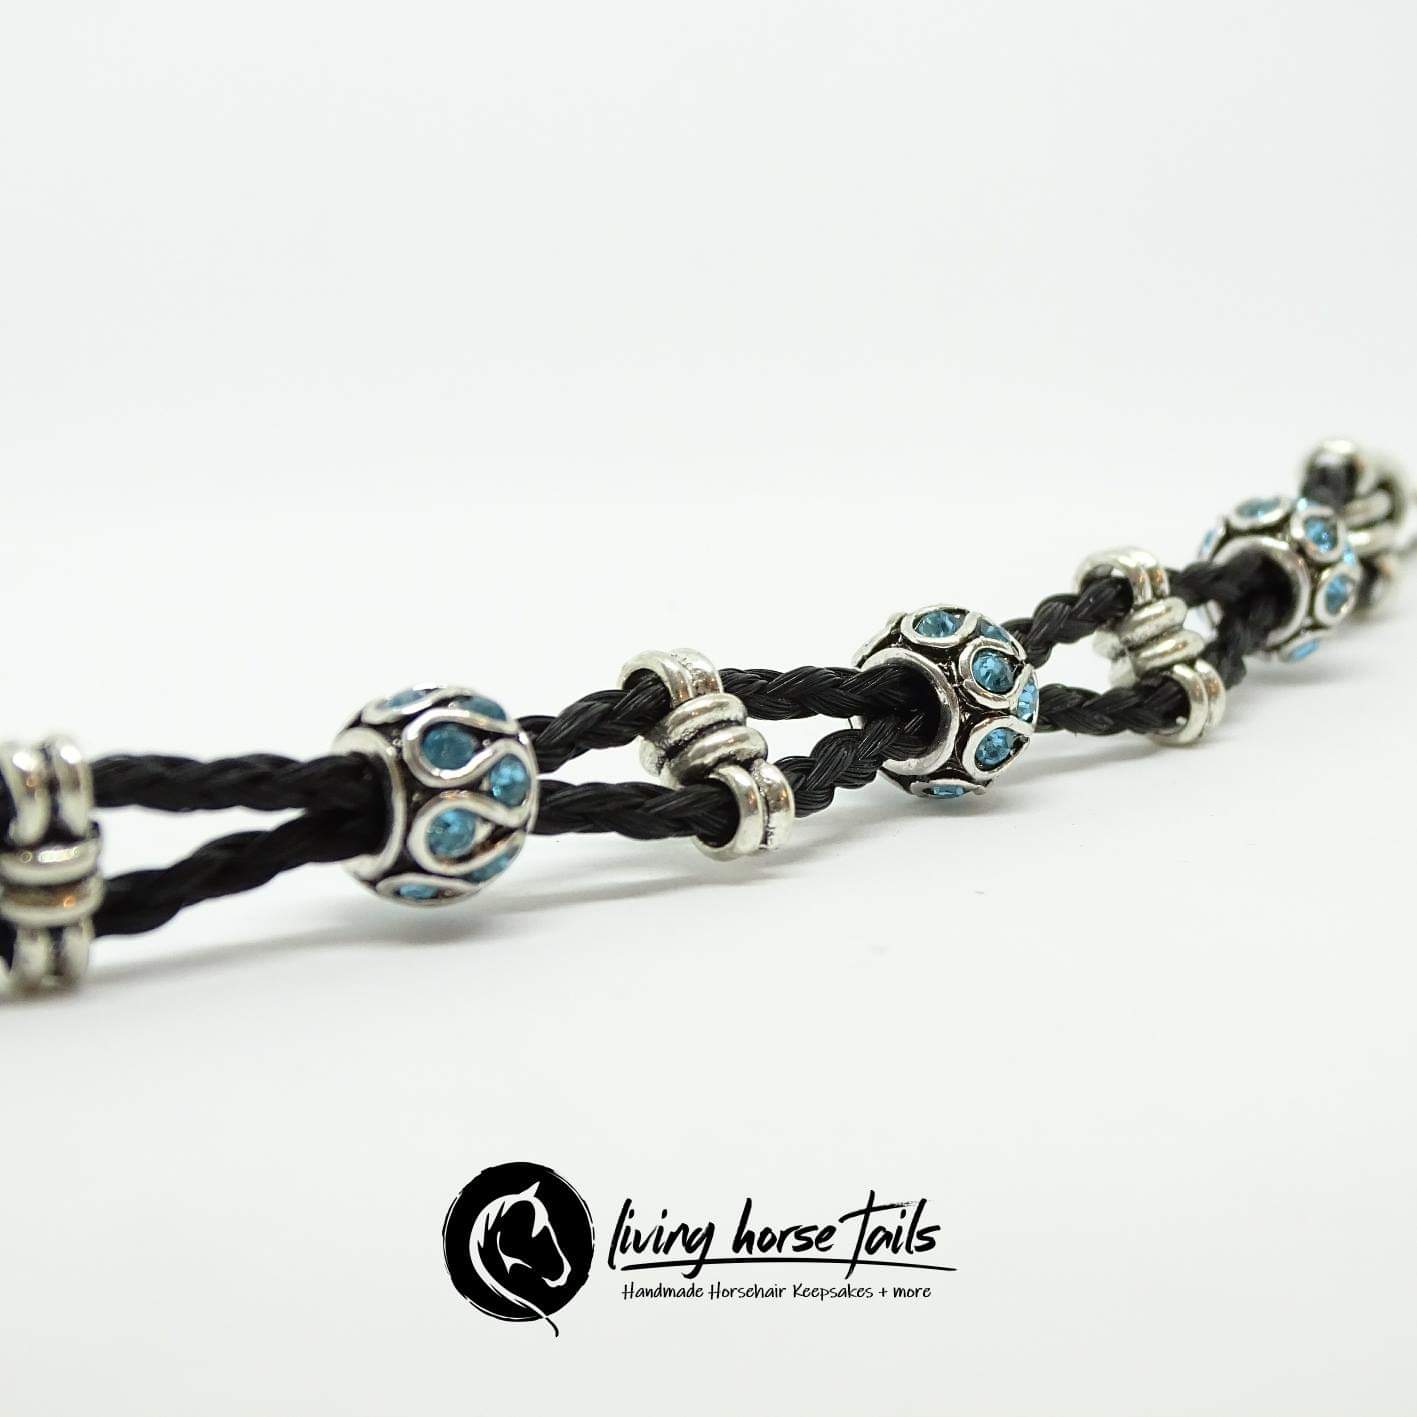 Double Strand Braided Horsehair Bracelet with Blue Bead using Horse Ha ...